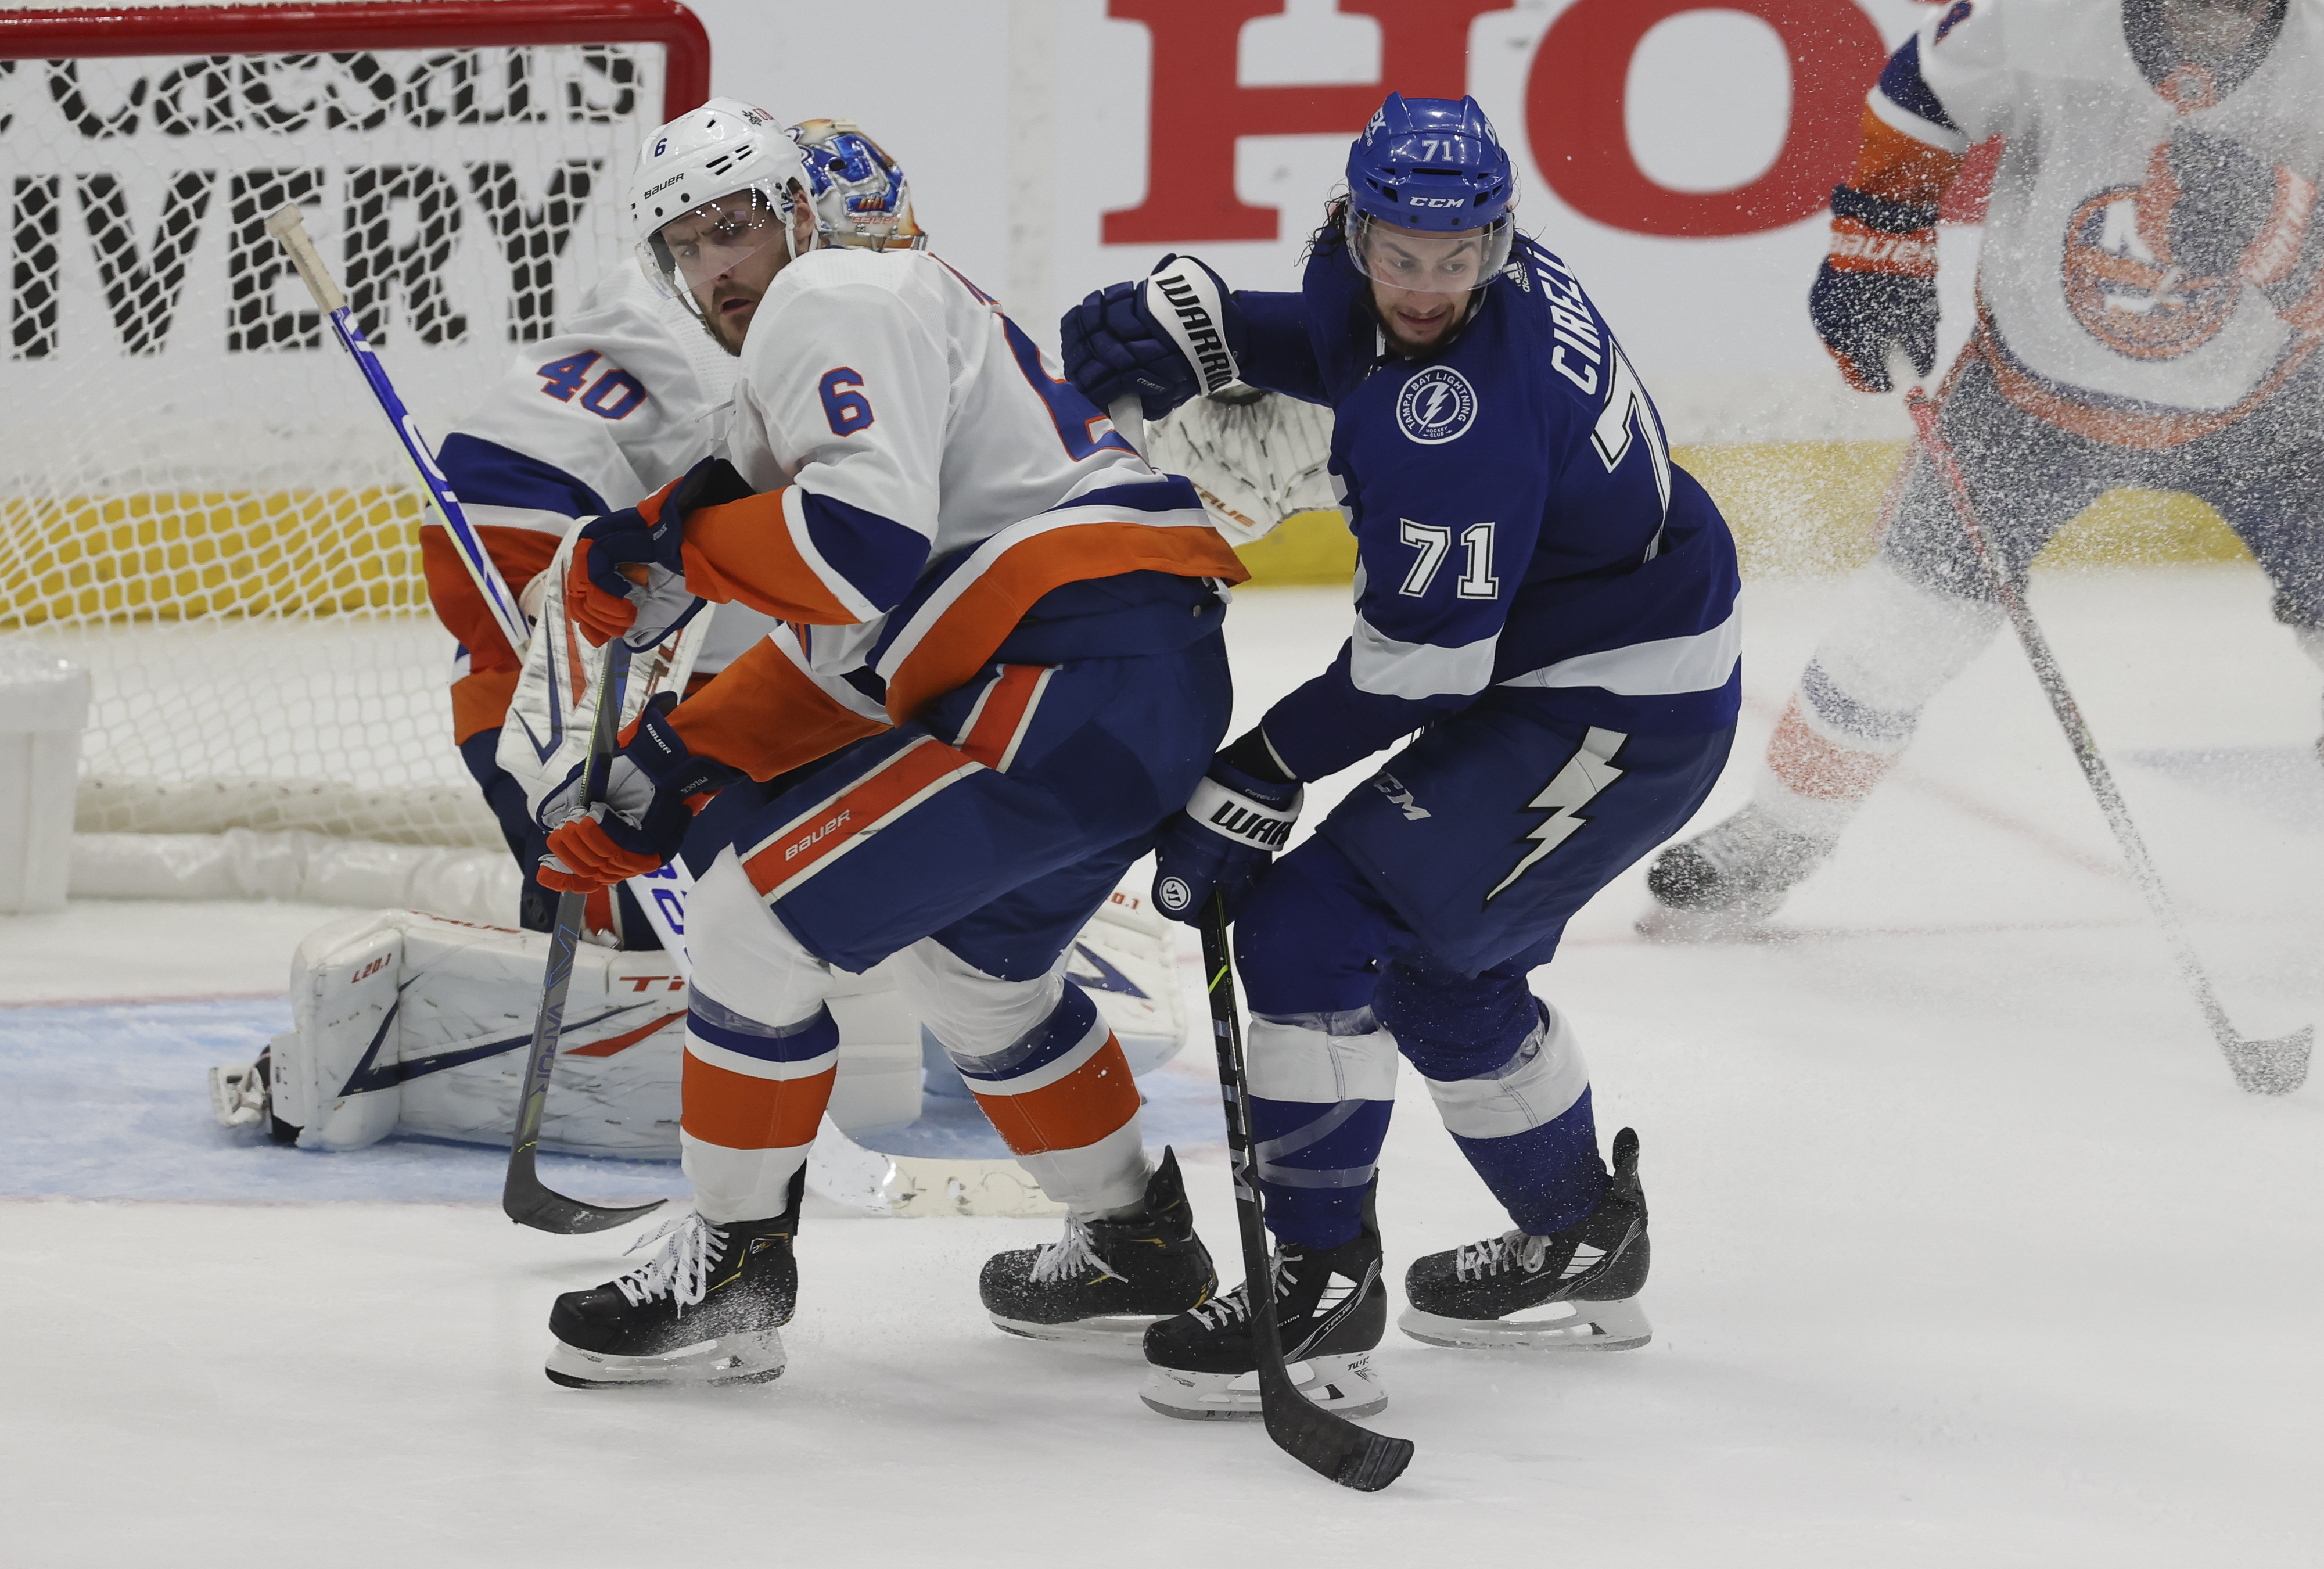 New York Islanders defenseman Ryan Pulock (6) skates against Tampa Bay Lightning center Anthony Cirelli (71) in the second period of Game 2 of the Stanley Cup Playoffs Semifinals between the New York Islanders and Tampa Bay Lightning on June 15, 2021 at Amalie Arena in Tampa, FL.